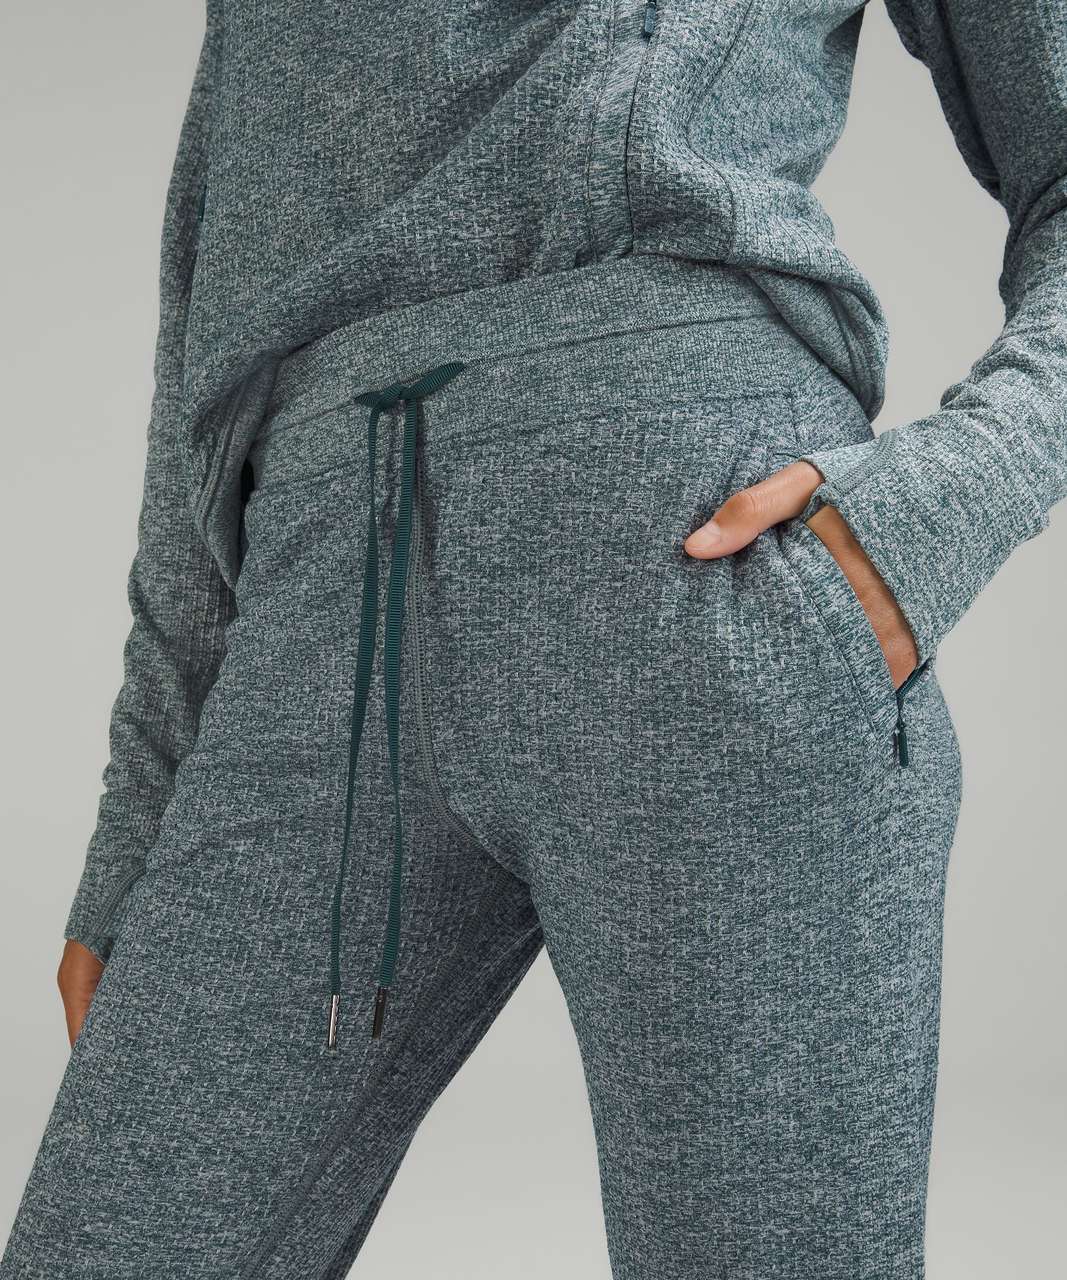 Lululemon Engineered Warmth Relaxed Fit Jogger - Green Jasper / White